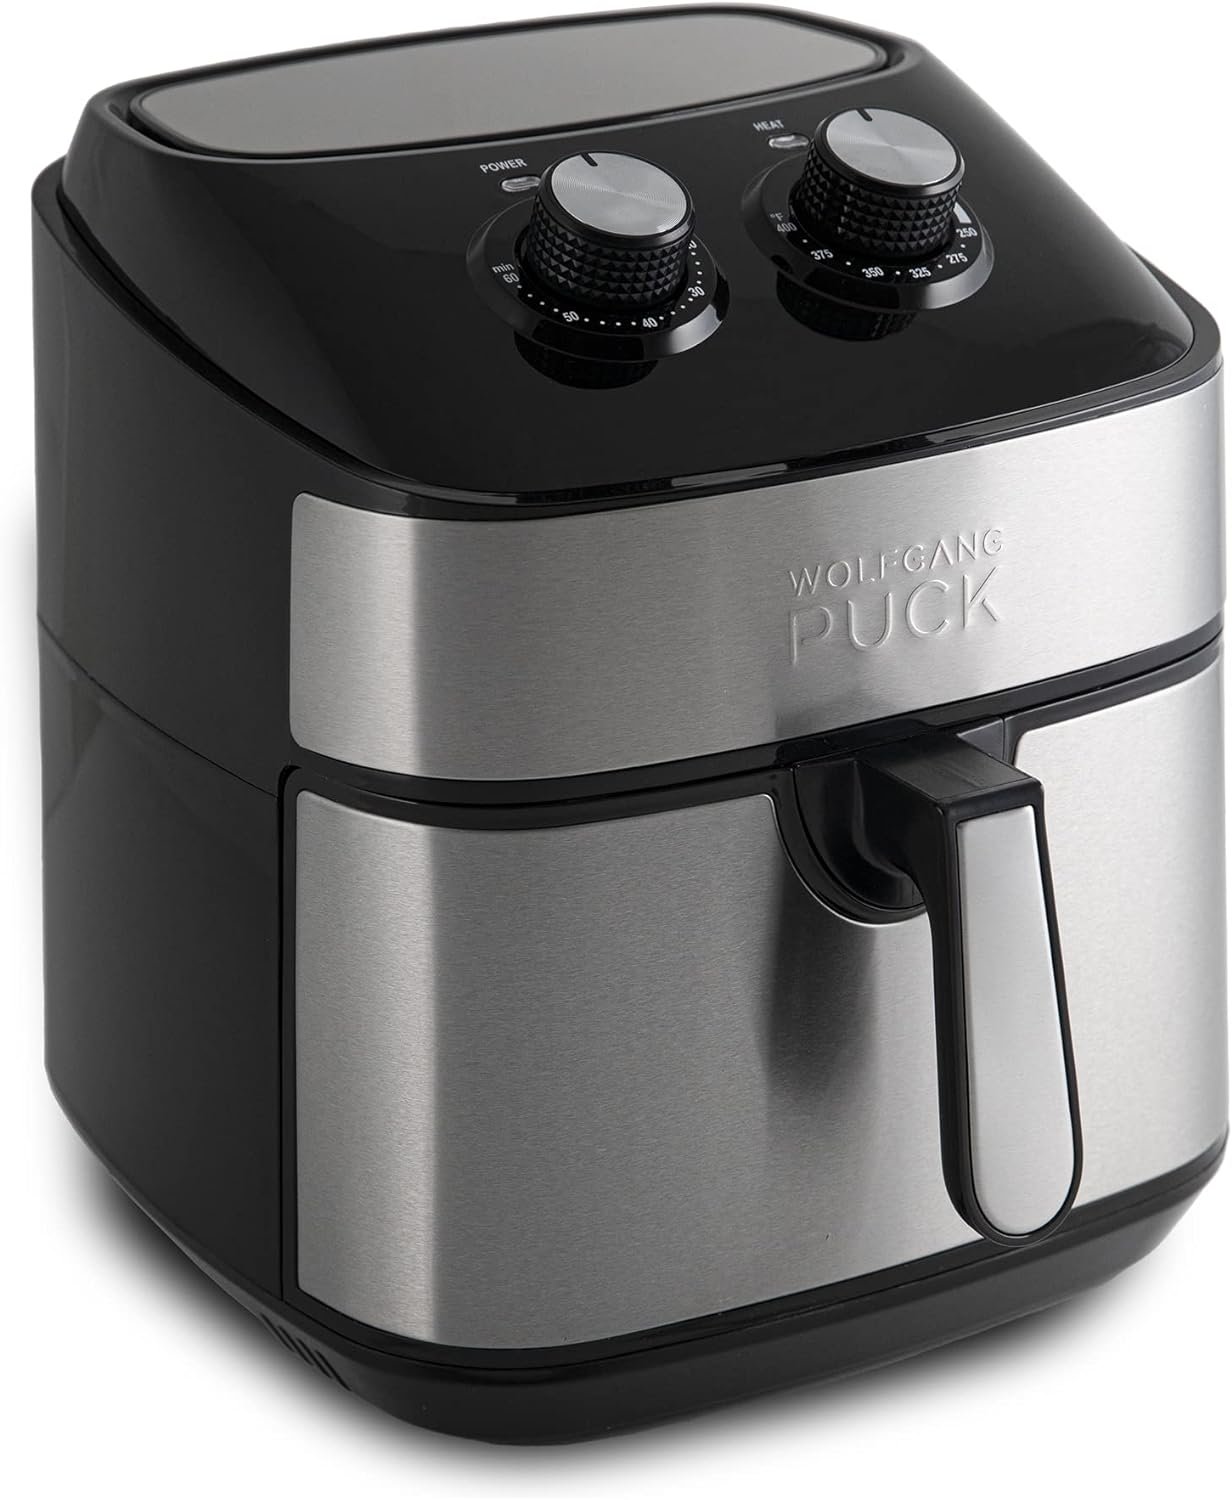 Wolfgang Puck 9.7QT Stainless Steel Air Fryer, Large Single Basket Design, Simple Dial Controls, Nonstick Interior, Includes Cooking Guide  Recipes